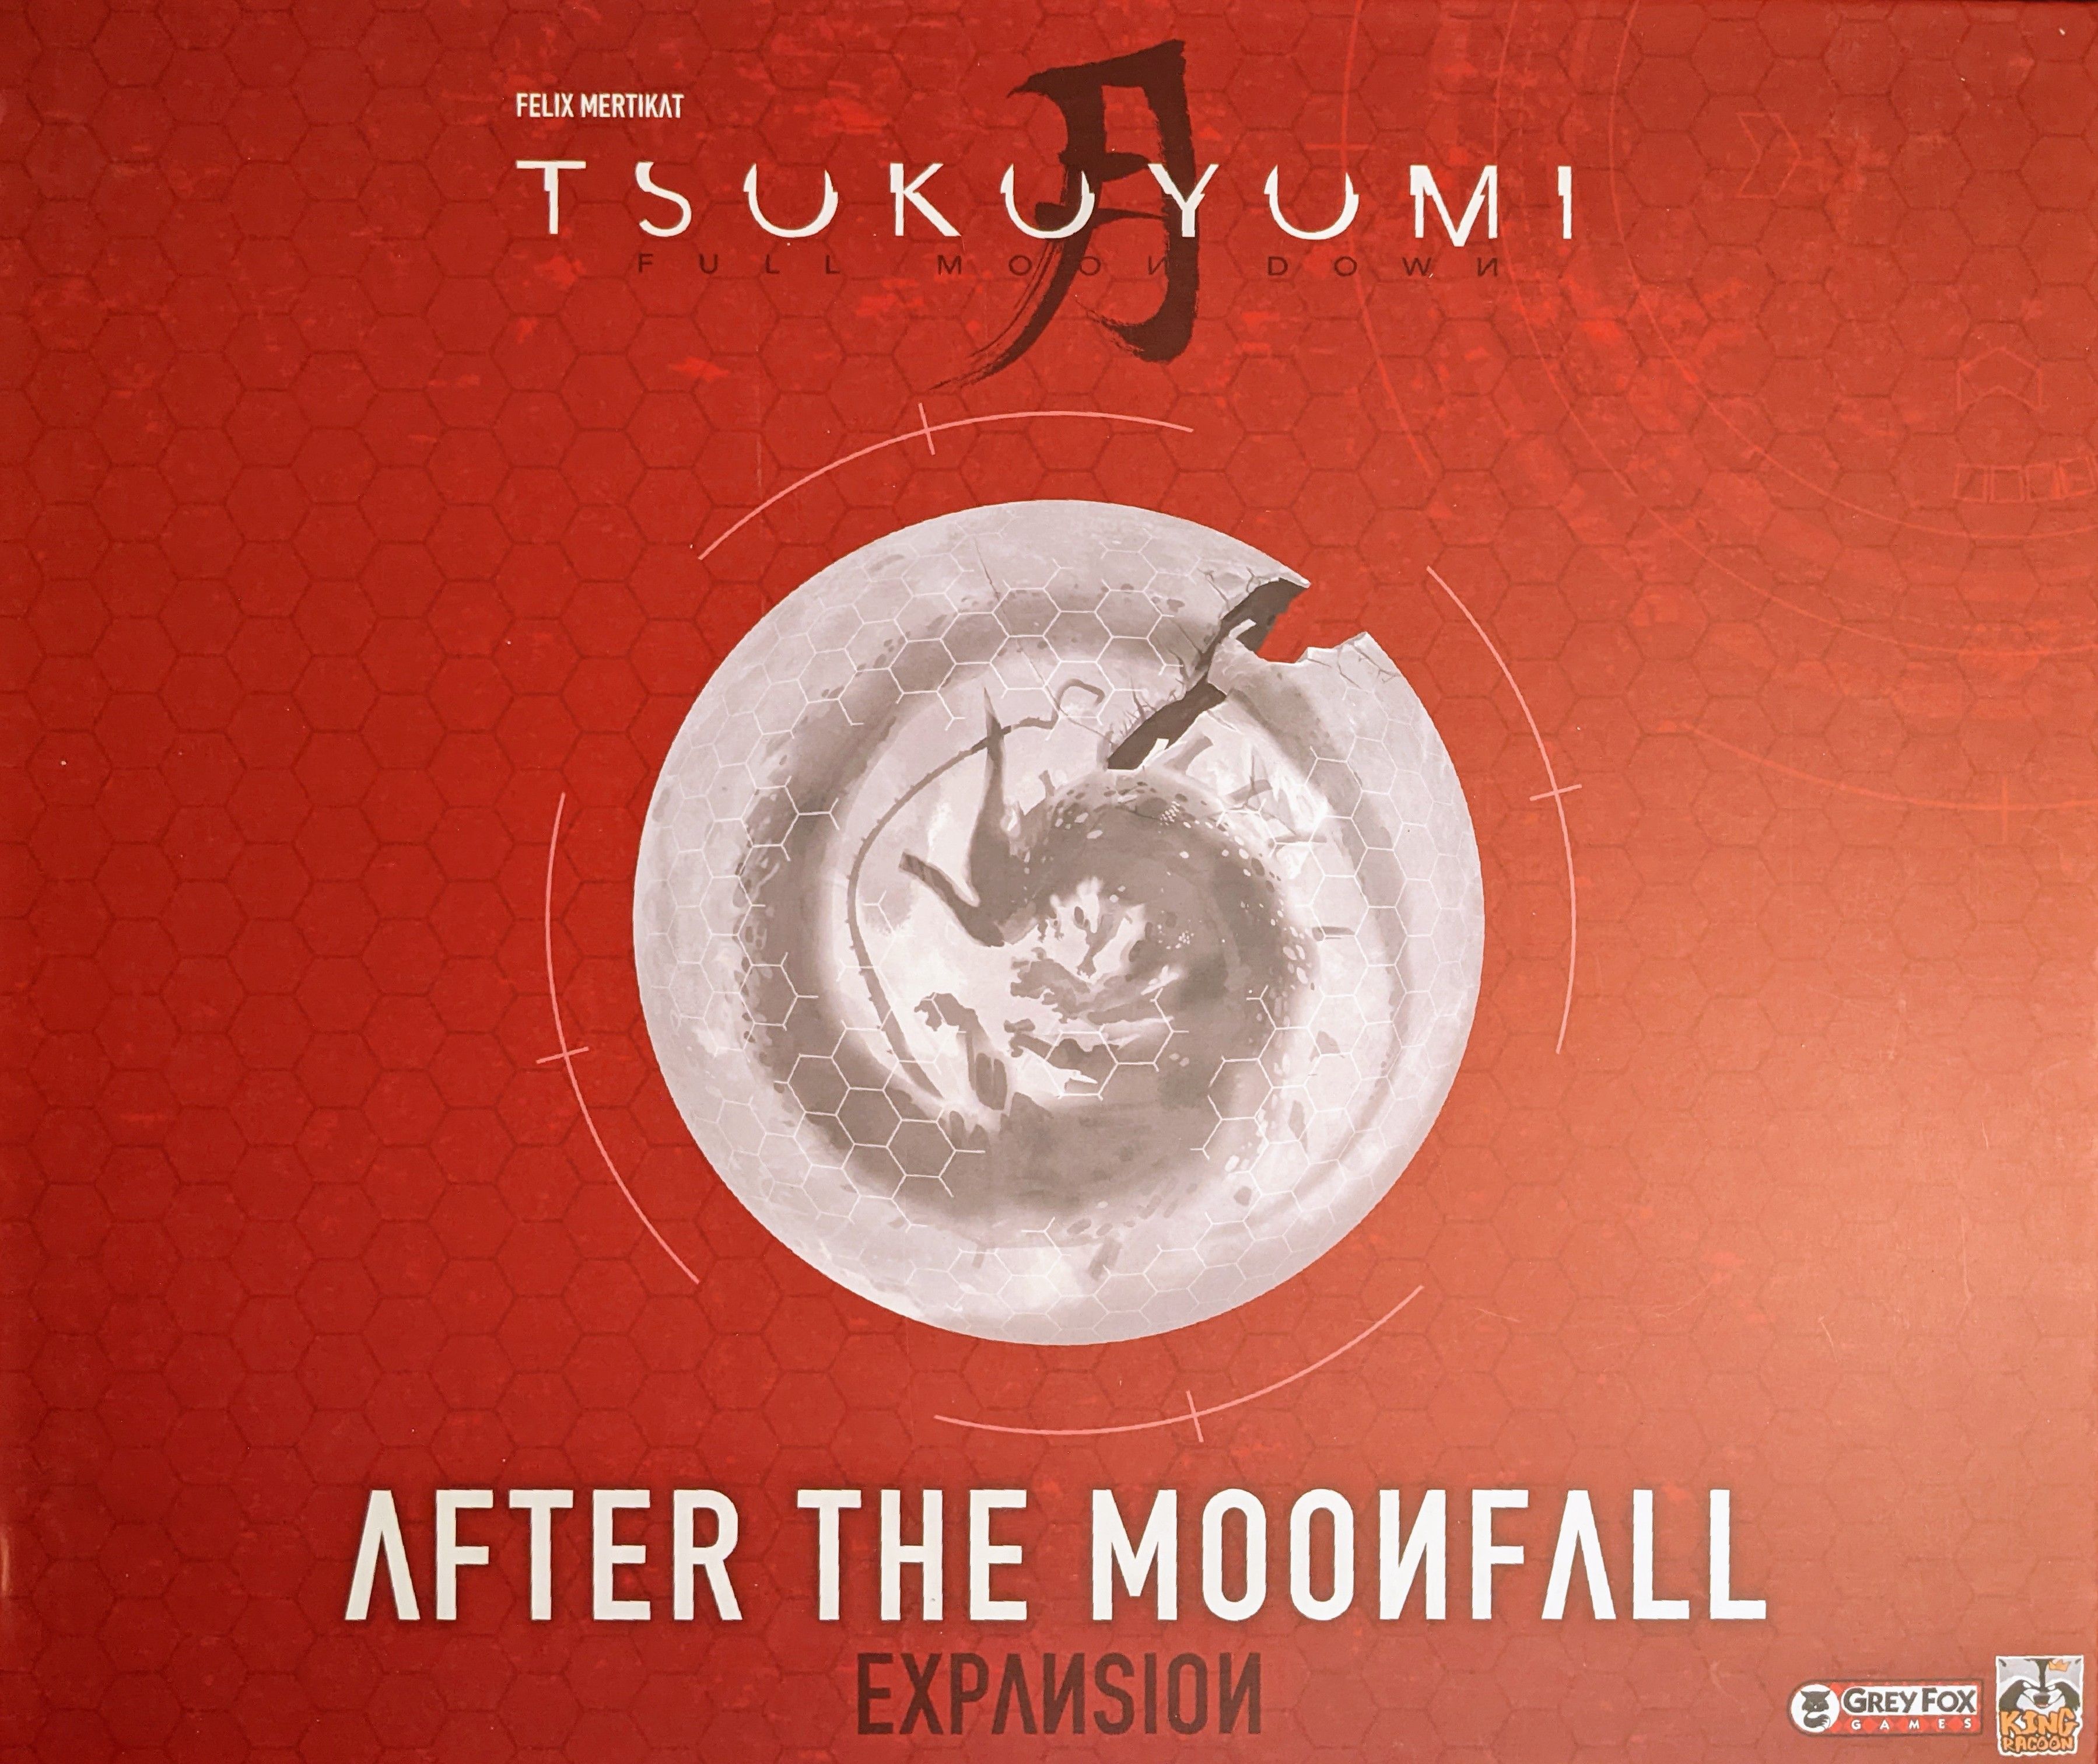 Tsukuyumi: Full Moon Down (Second Edition) – After the Moonfall